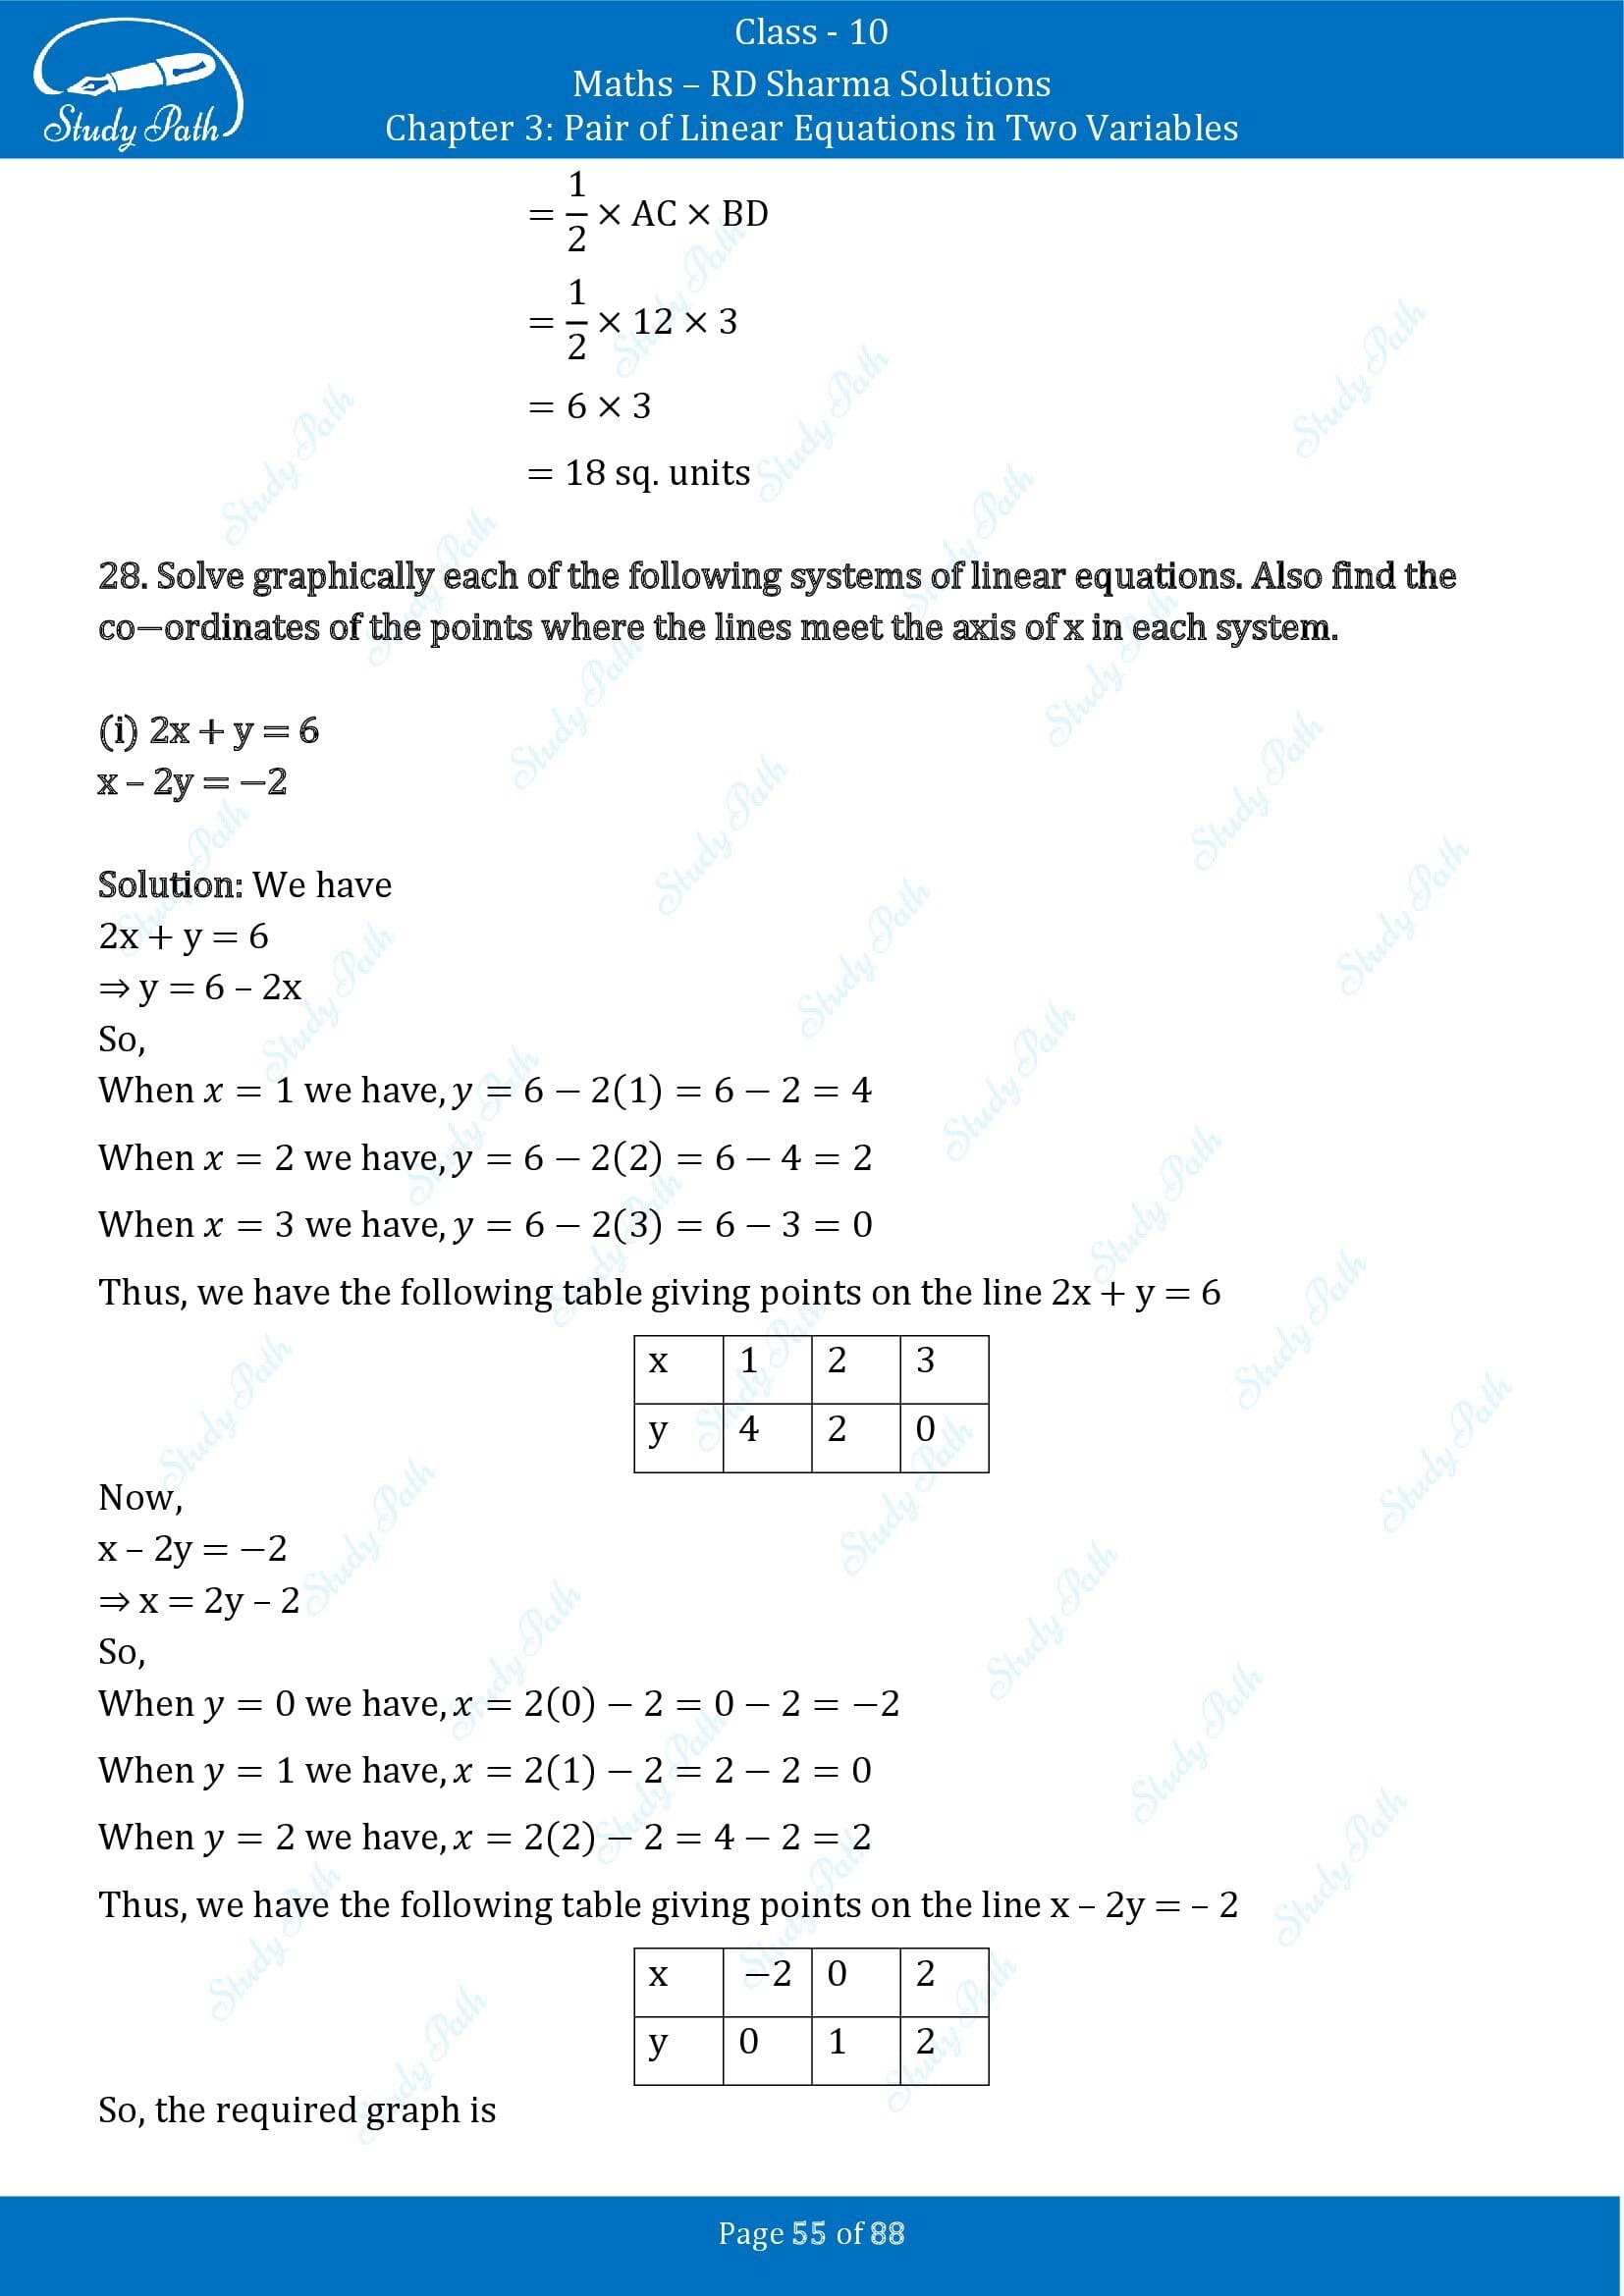 RD Sharma Solutions Class 10 Chapter 3 Pair of Linear Equations in Two Variables Exercise 3.2 00055